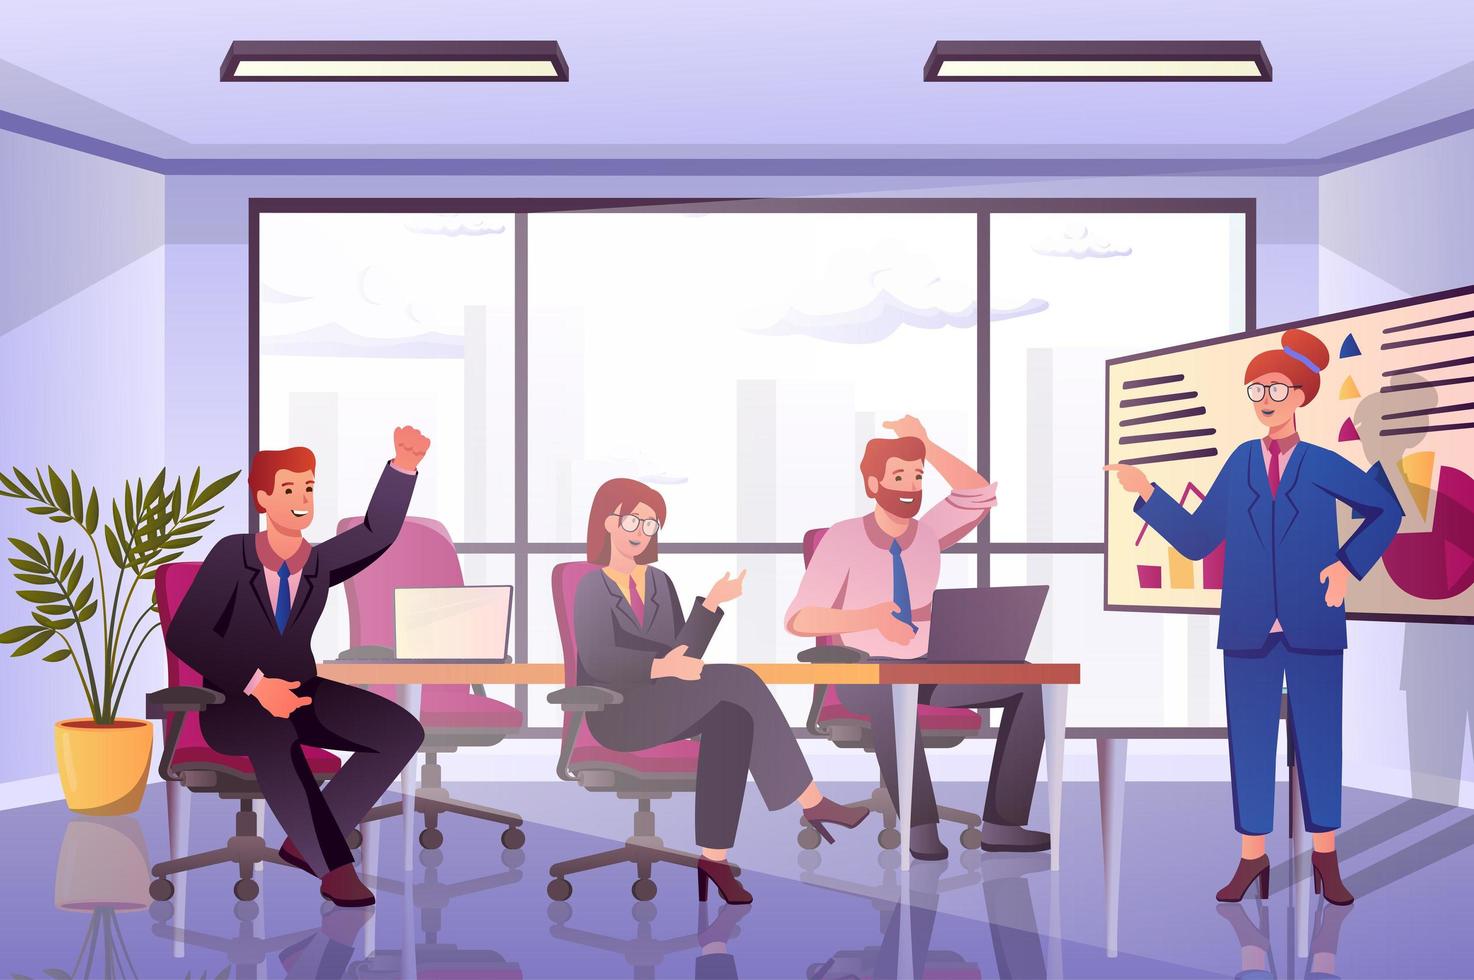 Conference hall concept in flat cartoon design. Colleagues sitting in room, brainstorming and discuss work tasks. Men and women employees communicate. Vector illustration with people scene background